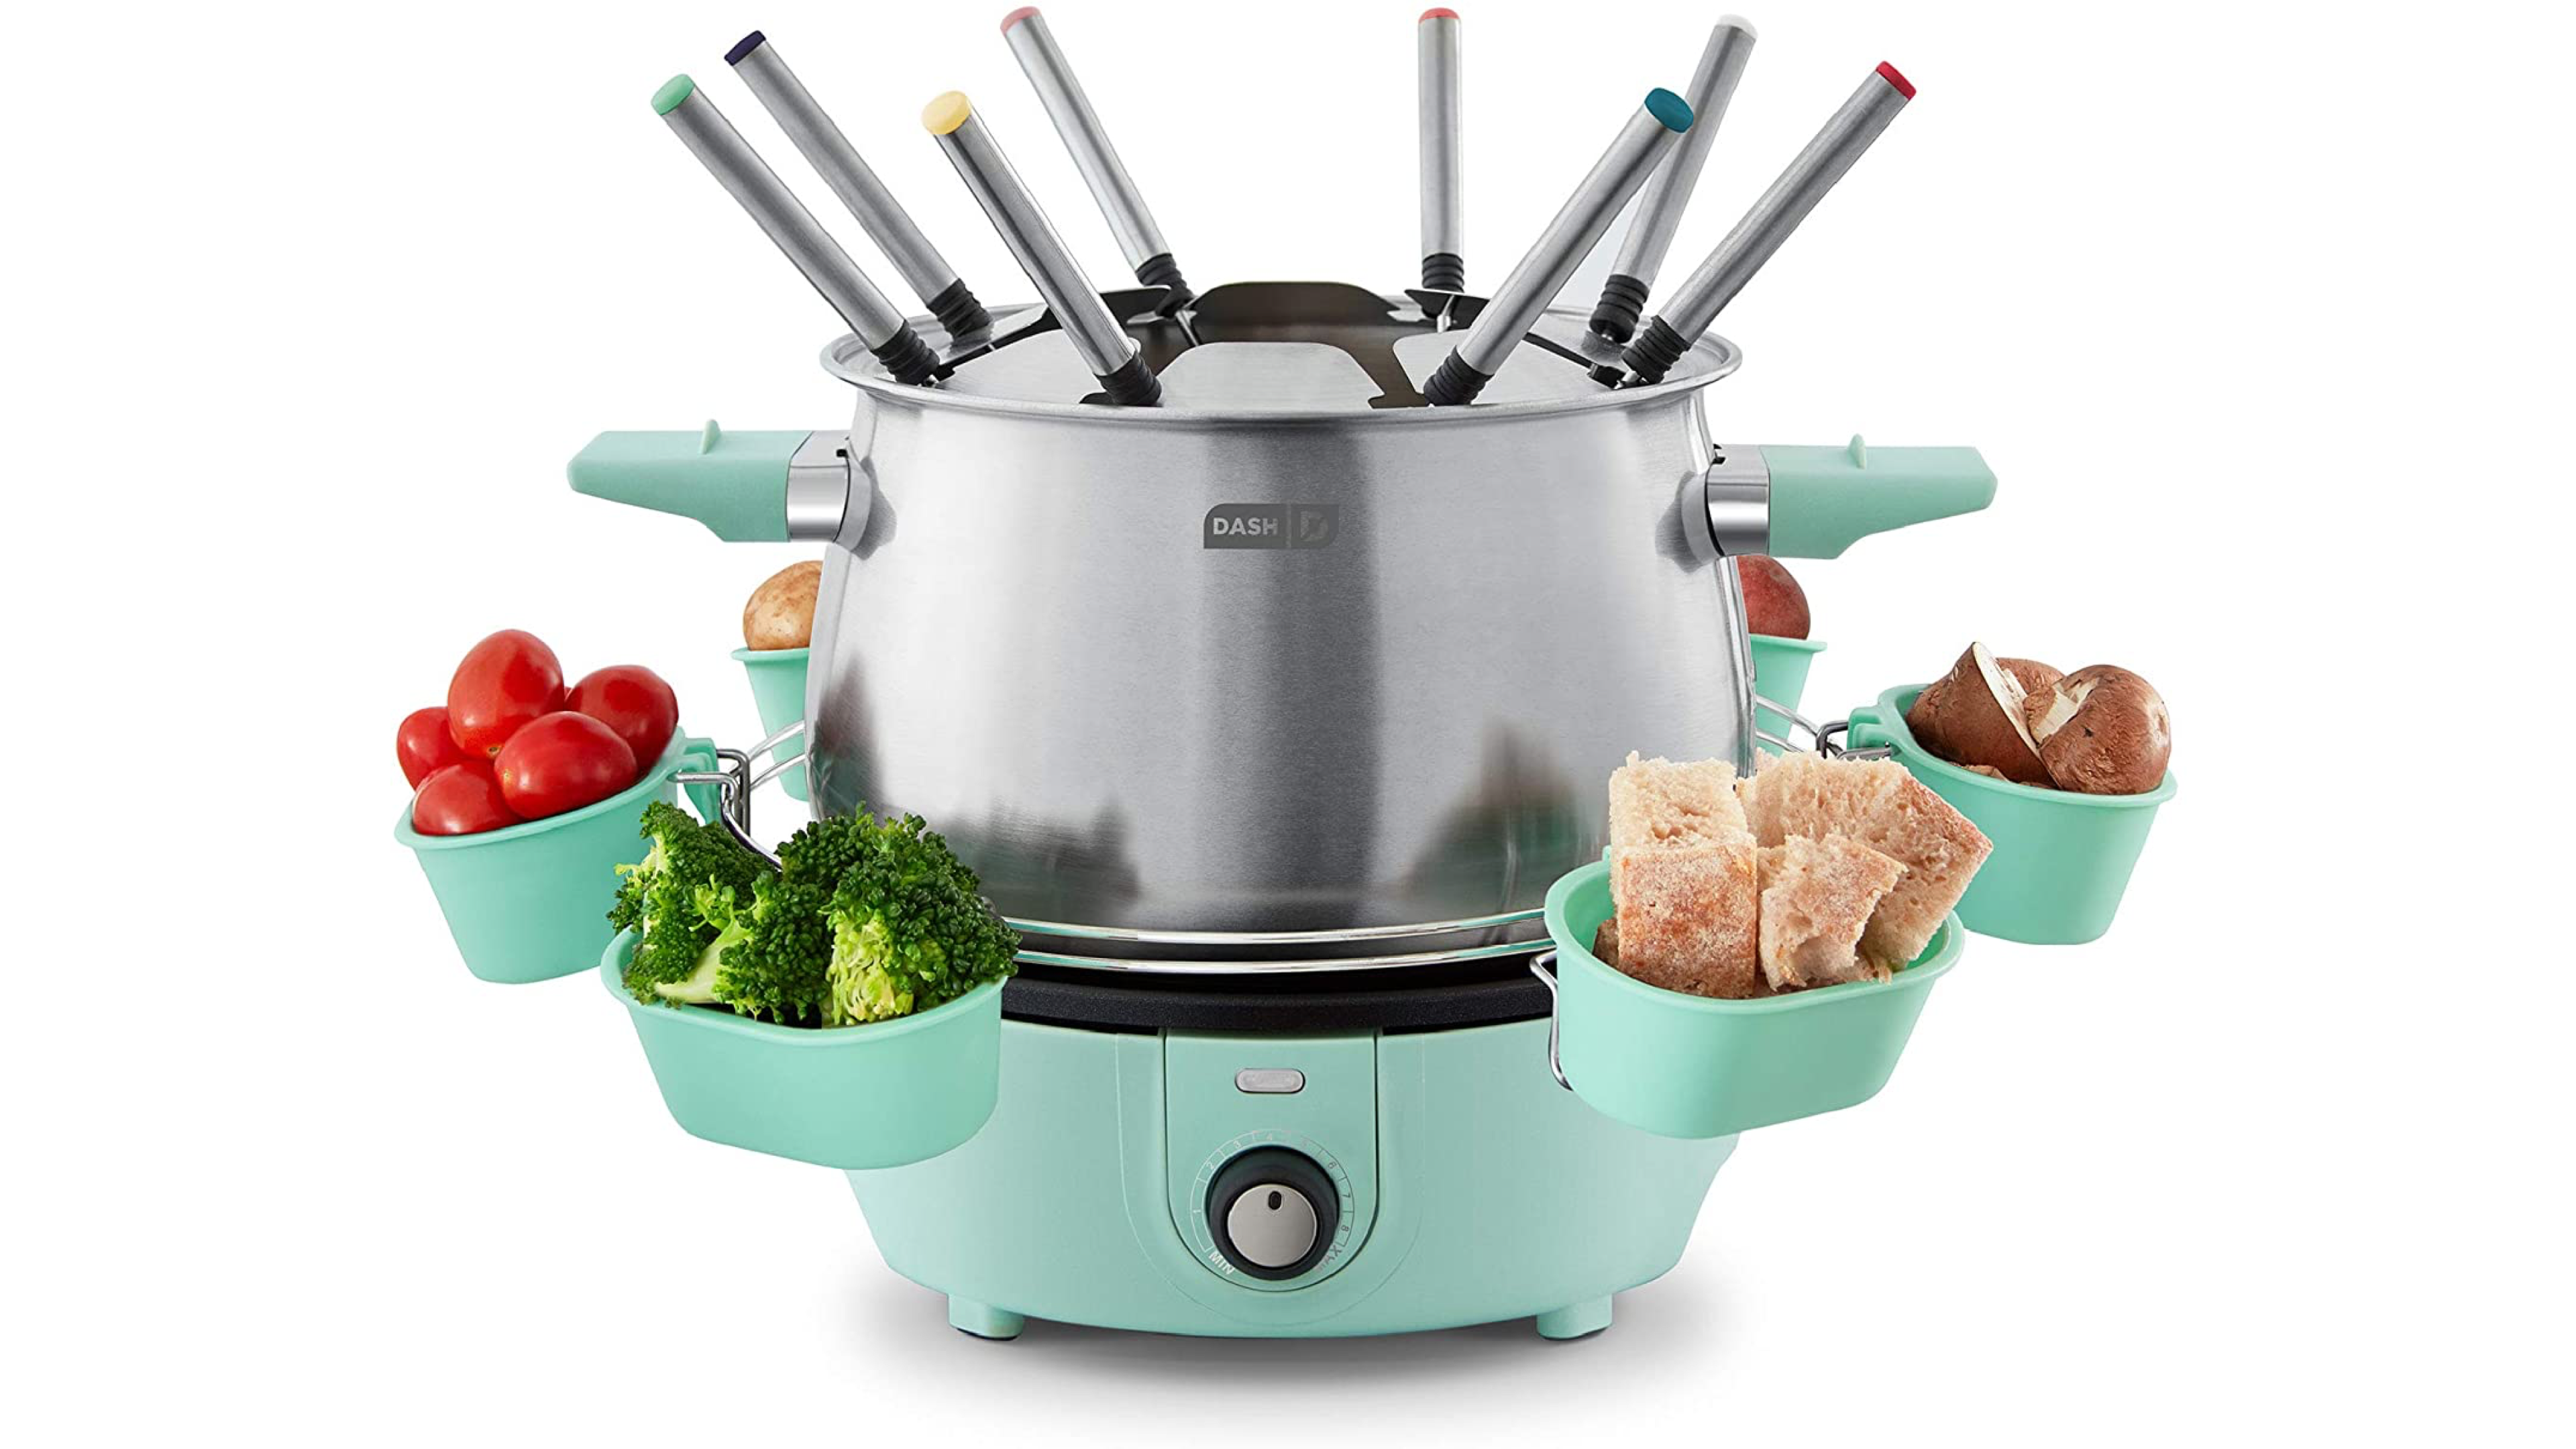 fondue maker with forks for dipping